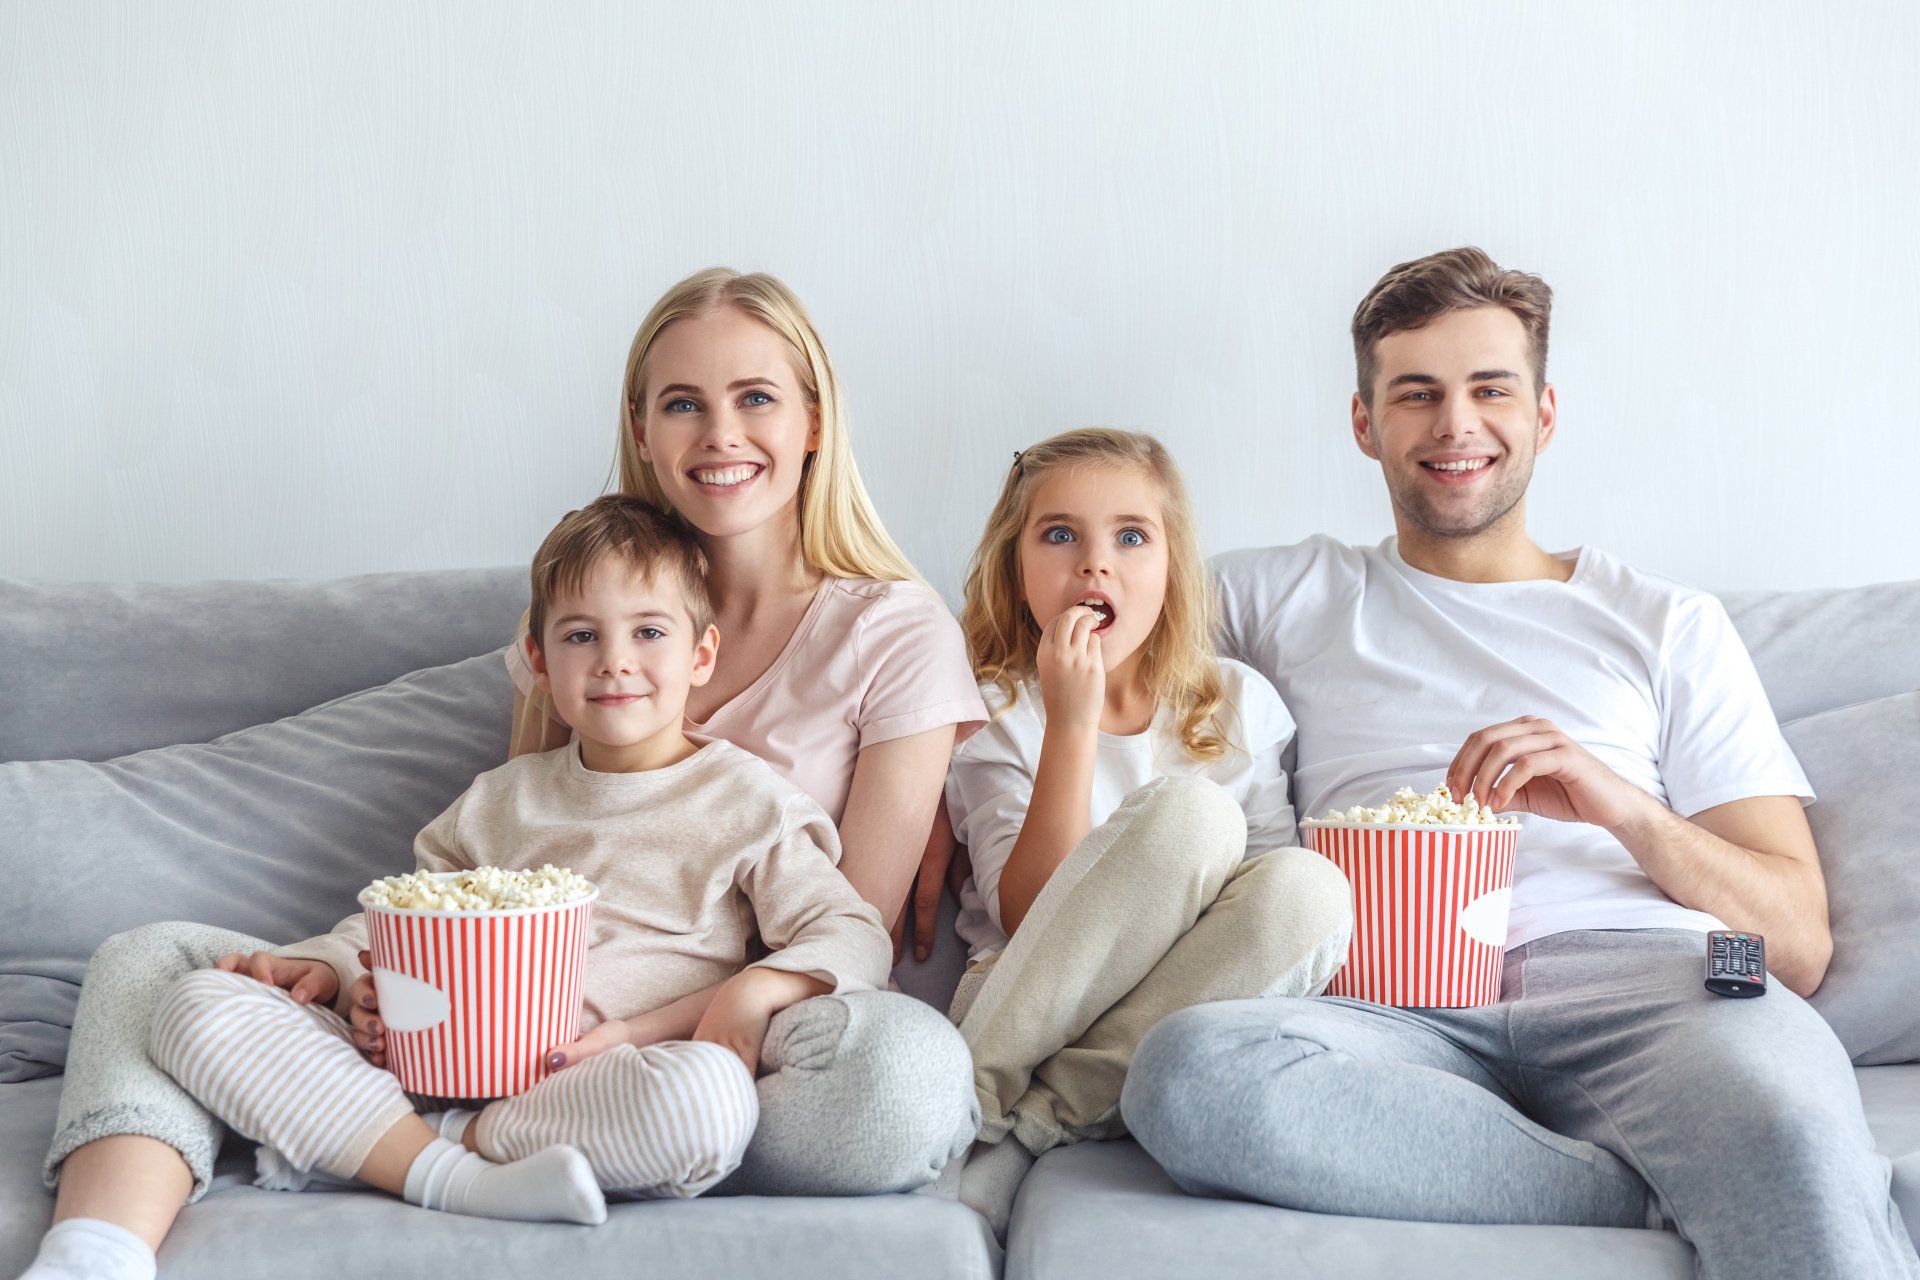 A photograph of a family, a man and woman along with a young boy and girl, sat on a sofa eating popcorn